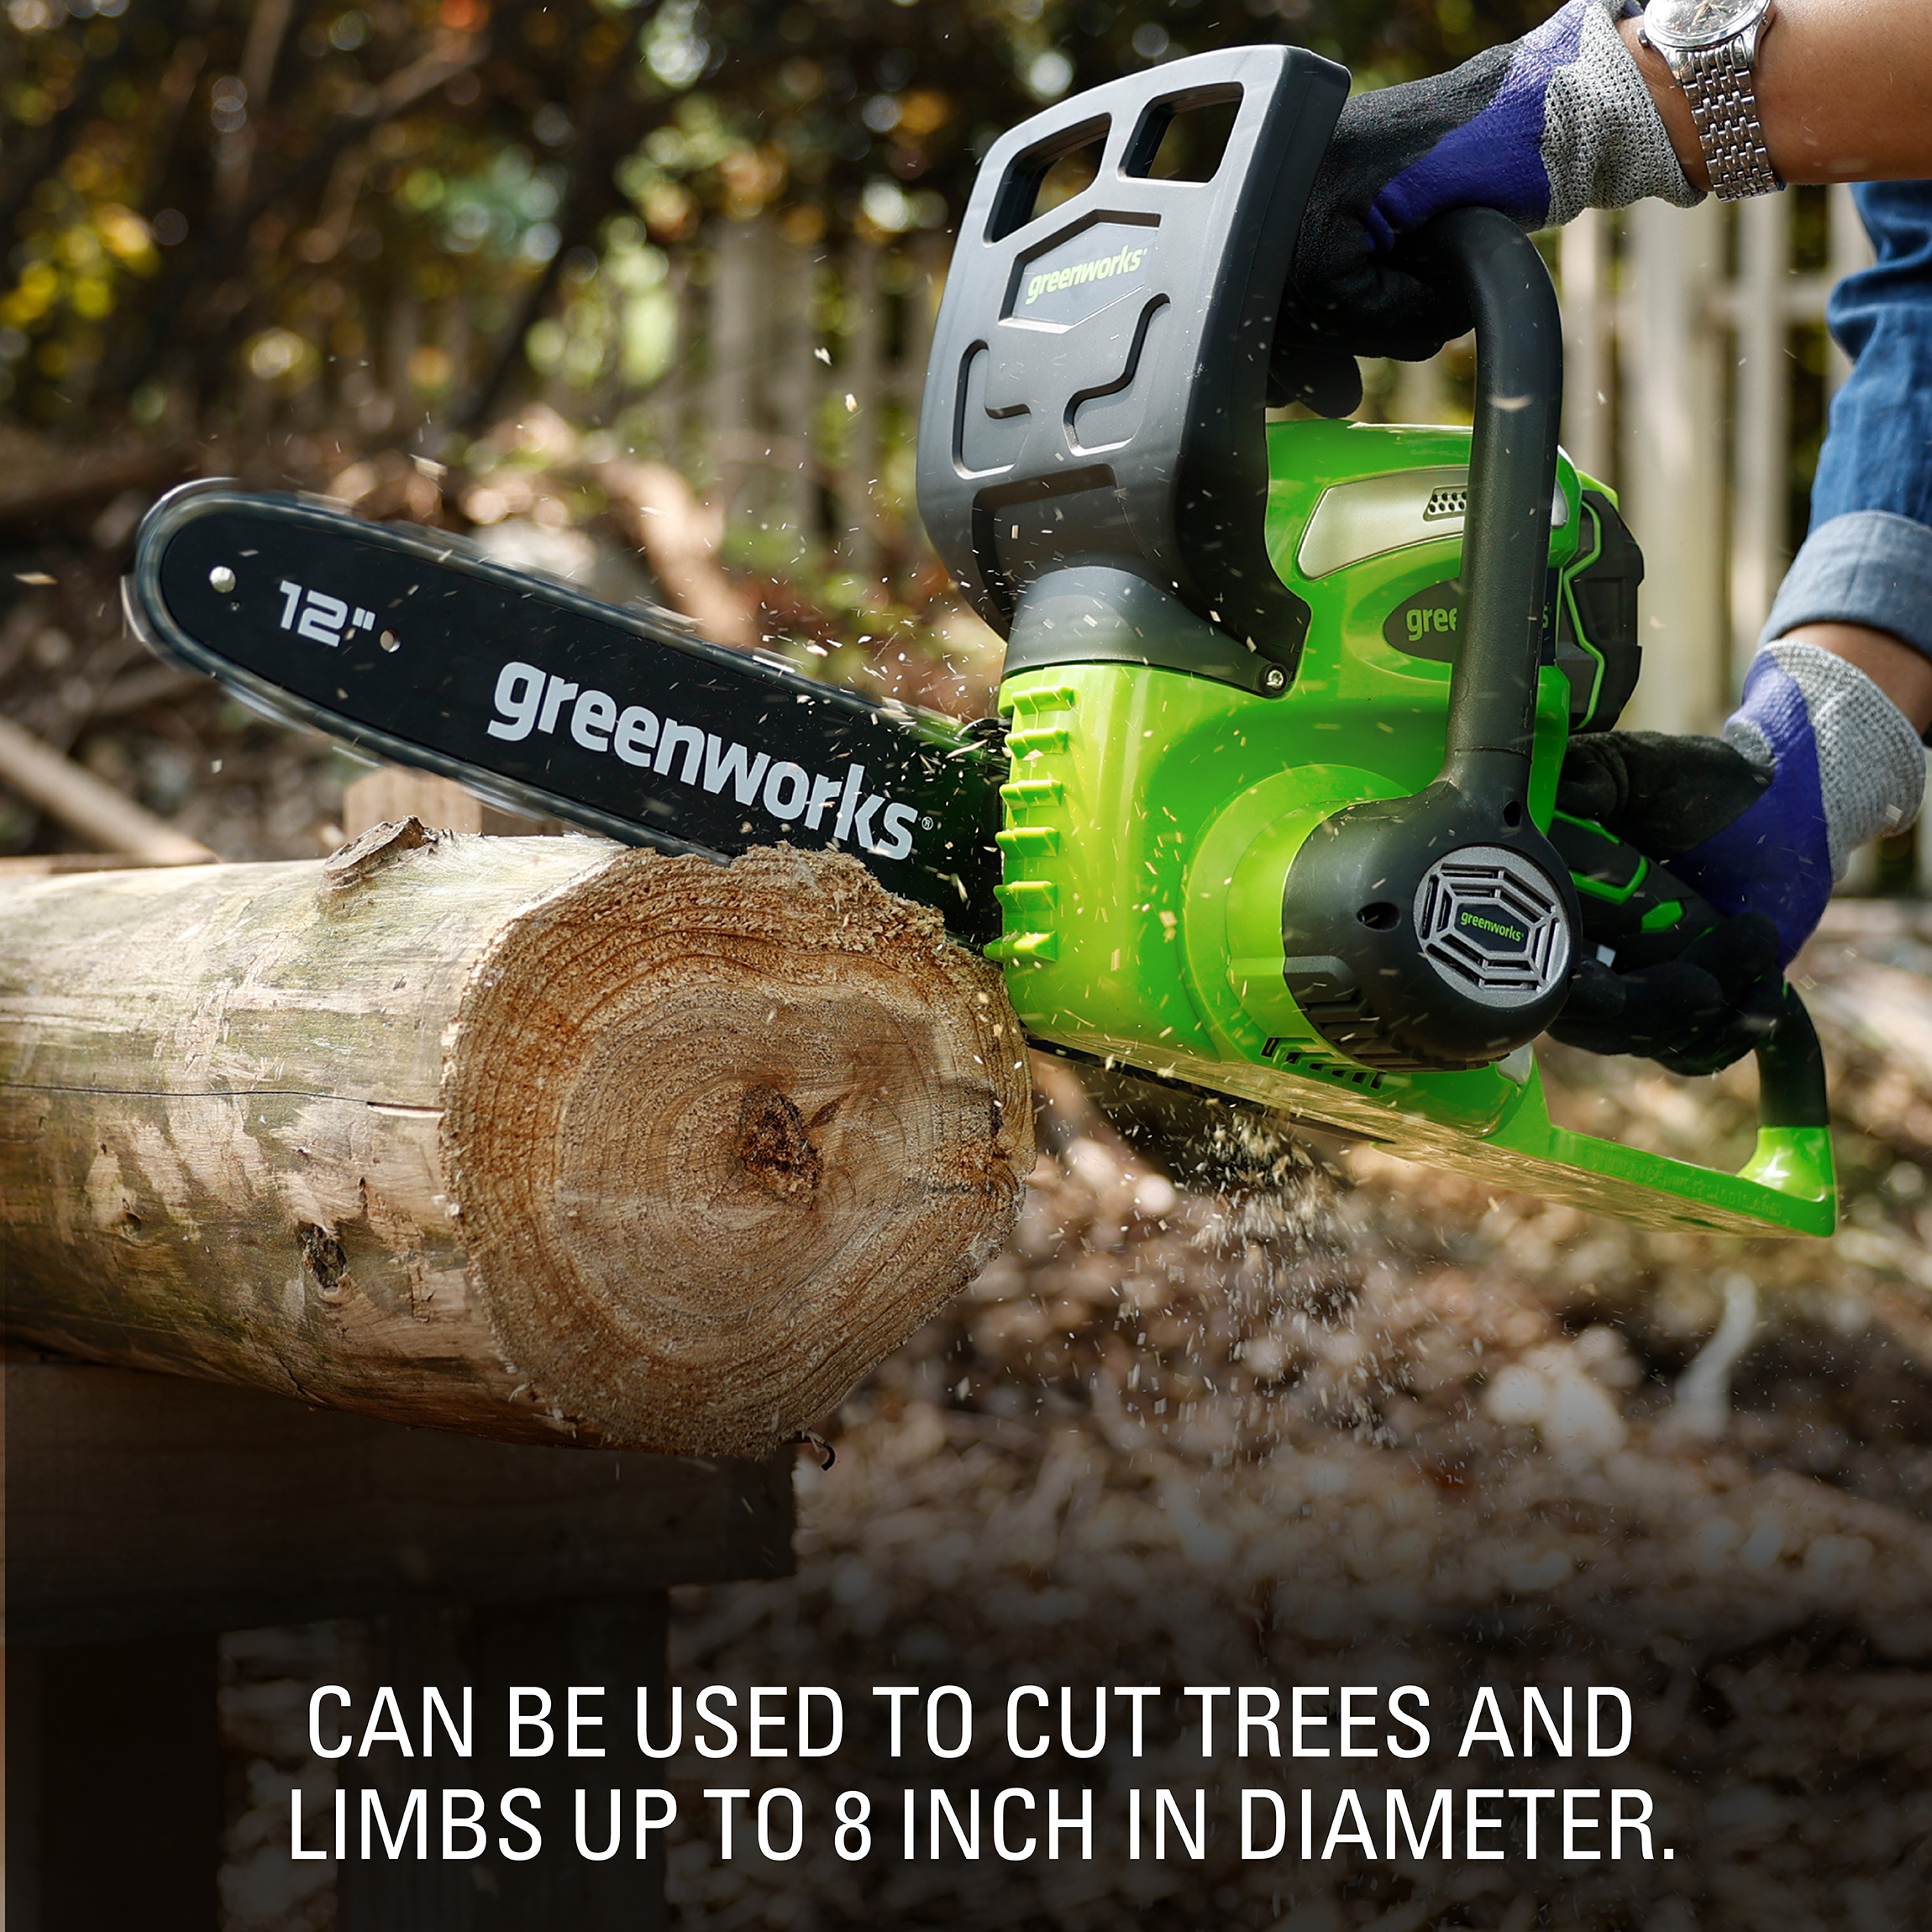 GreenWorks 20292 40V 12" Cordless Chainsaw, Battery and Charger Sold Separately - image 8 of 14